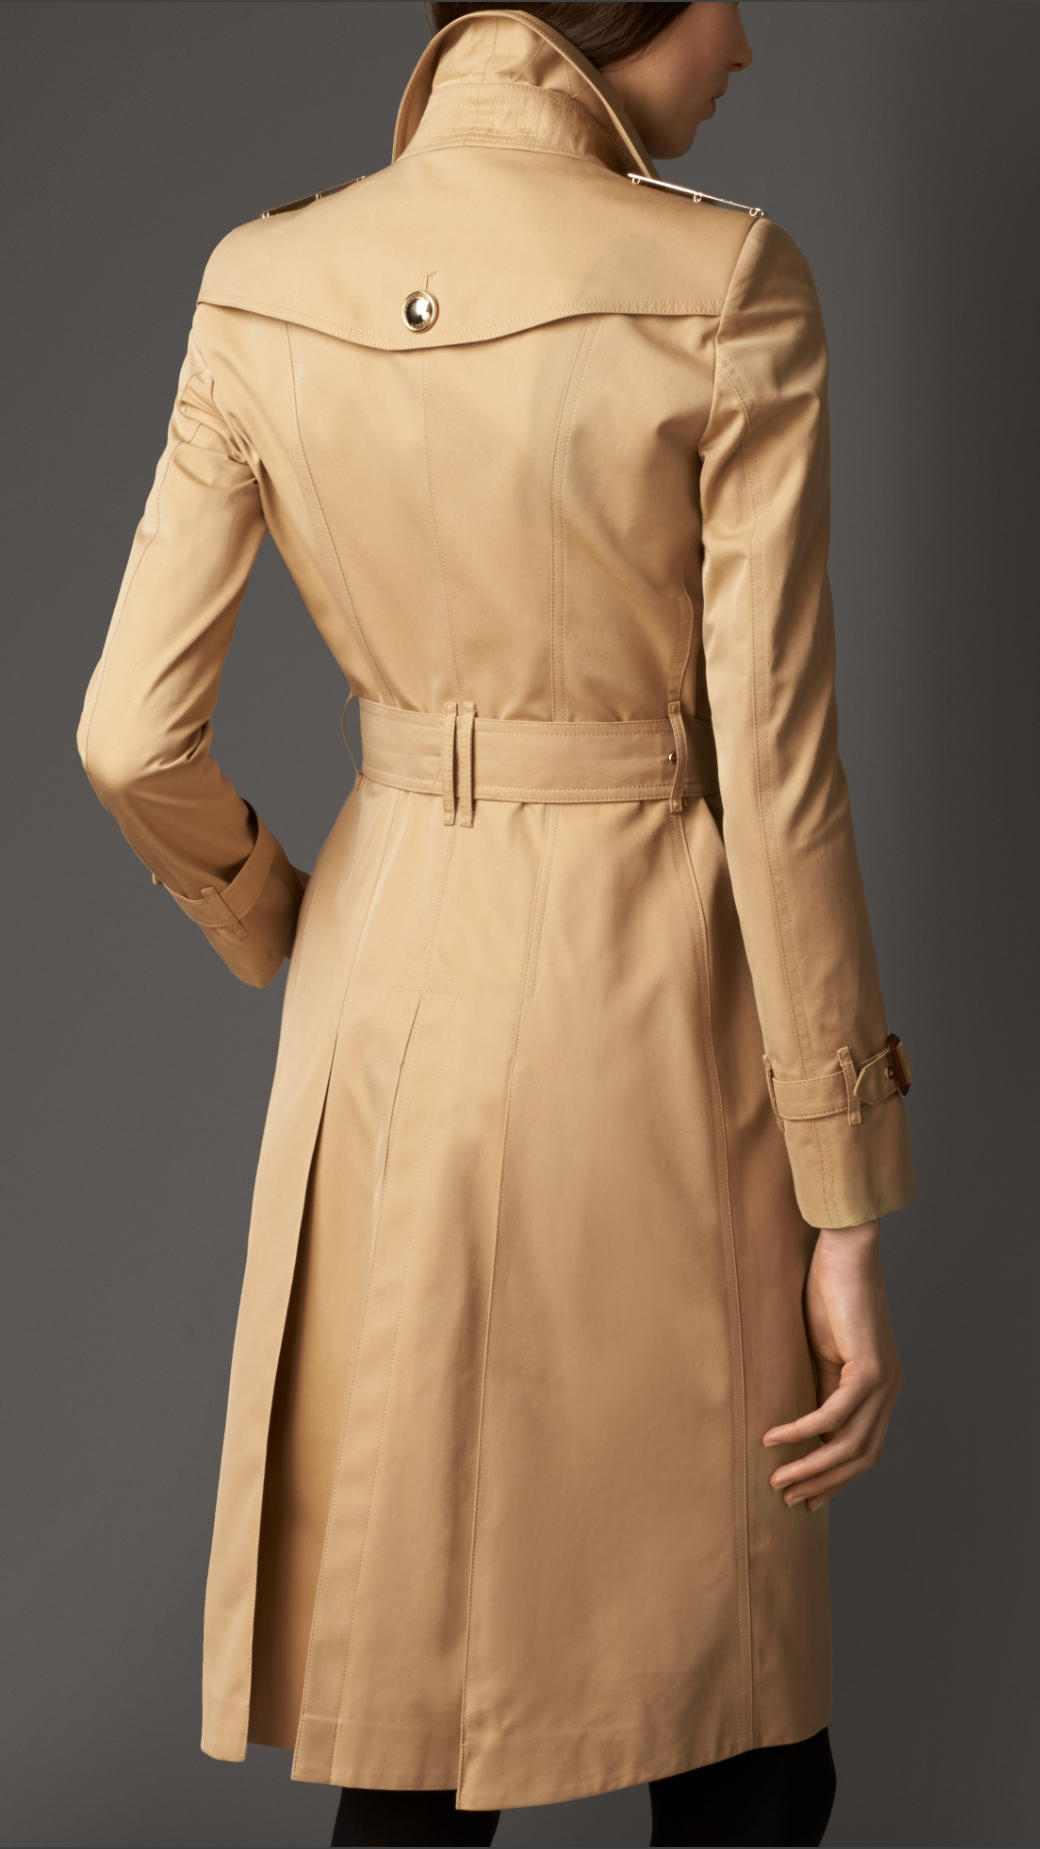 Lyst - Burberry Long Military Detail Gabardine Trench Coat in Natural